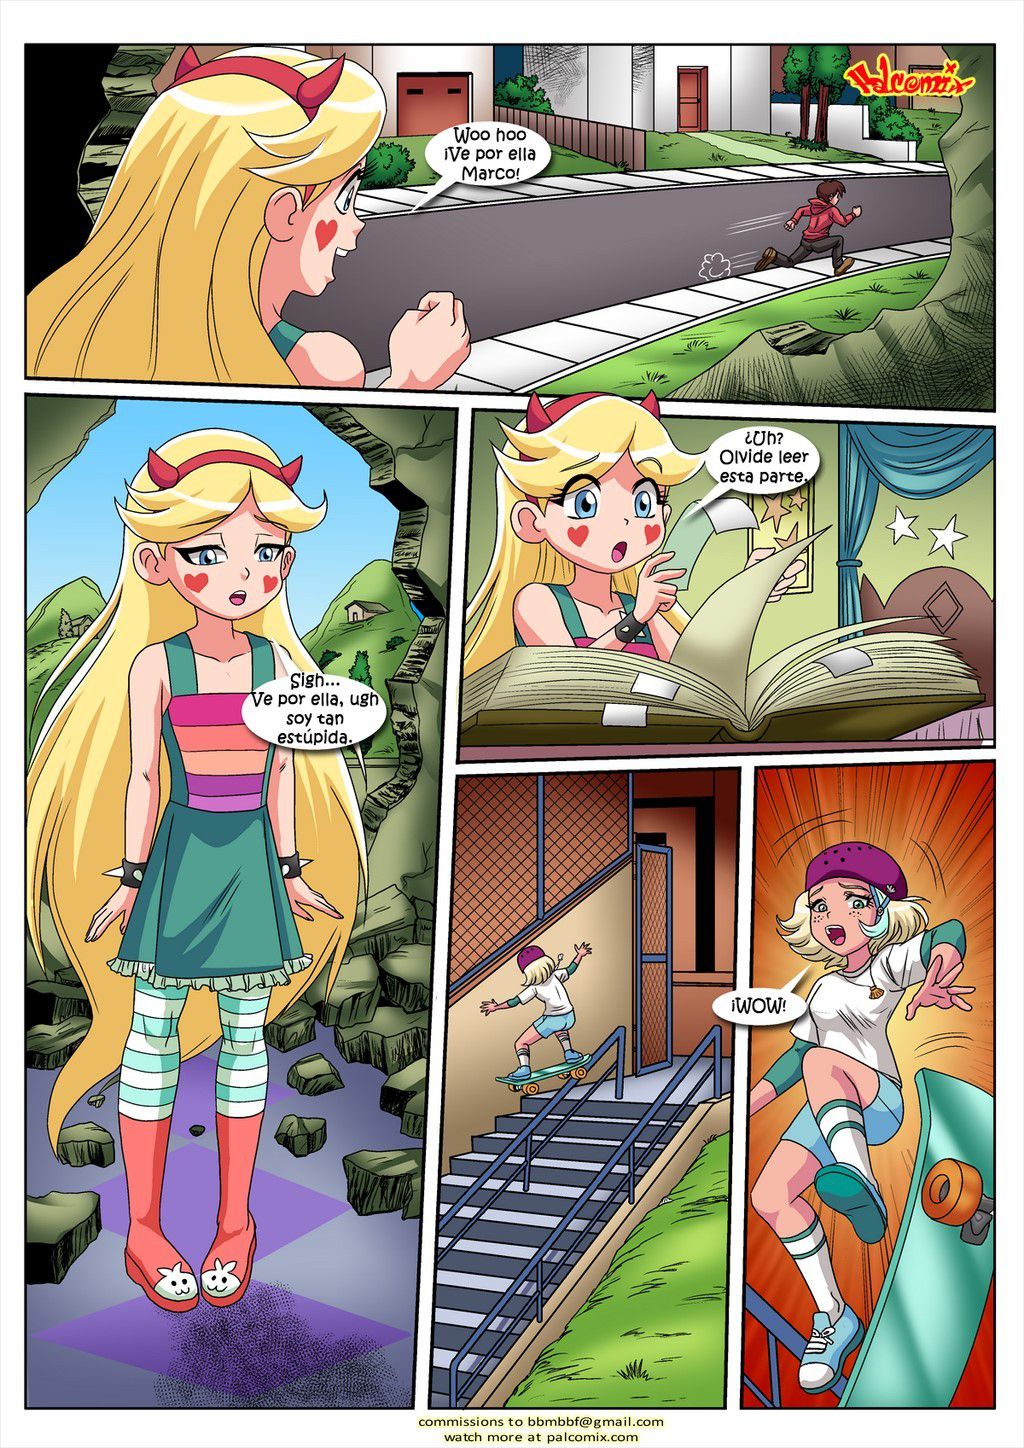 [Palcomix] Amante Latino (Star vs. the Forces of Evil) [Spanish] 4